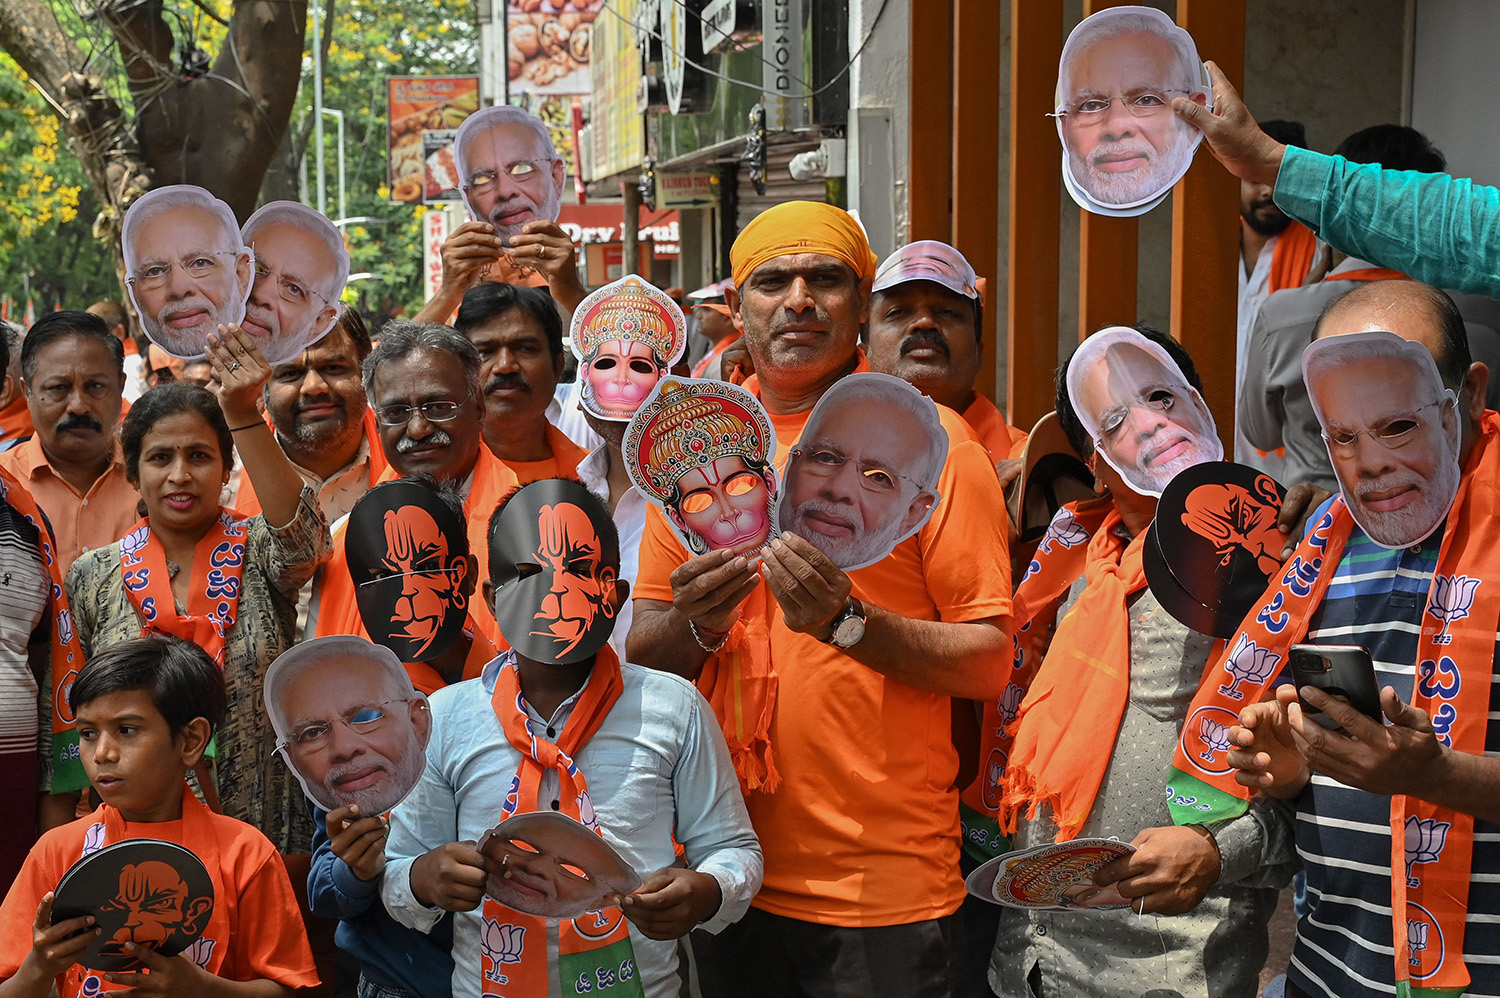 The call for banning the Bajrang Dal shows rare electoral courage